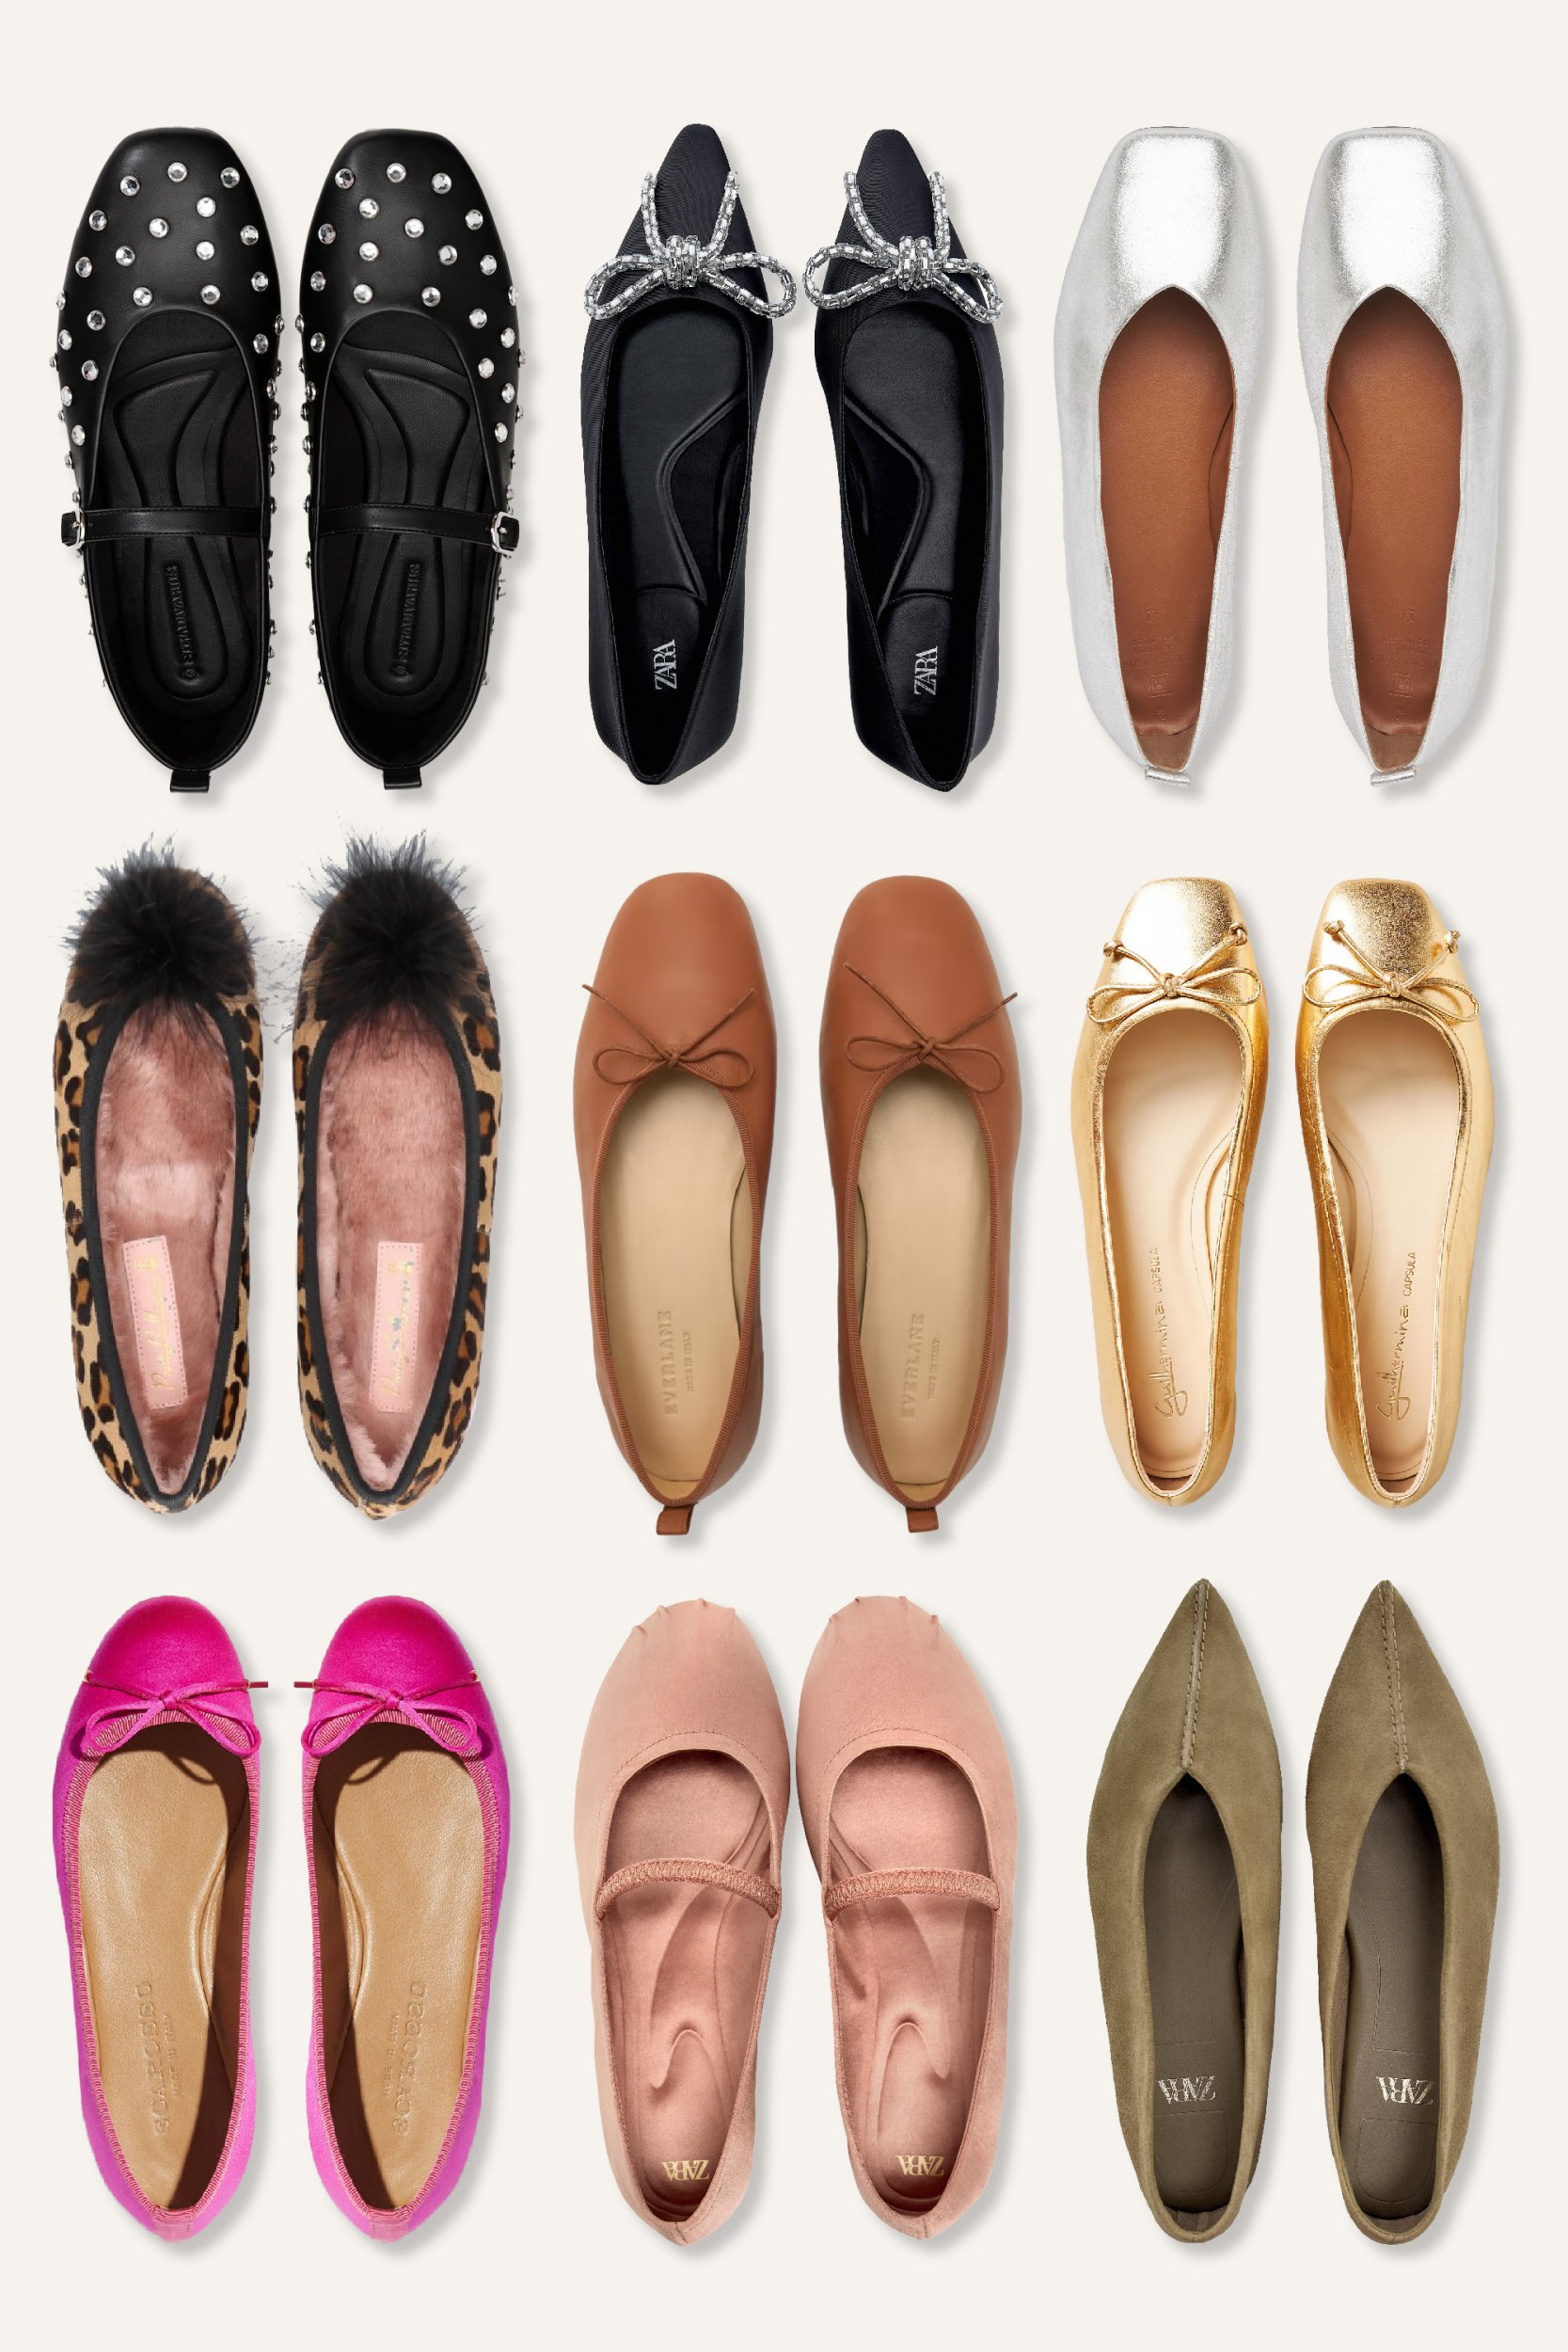 Ballet Flats Are Trending: These Are The Best To Snap Up Now For Spring